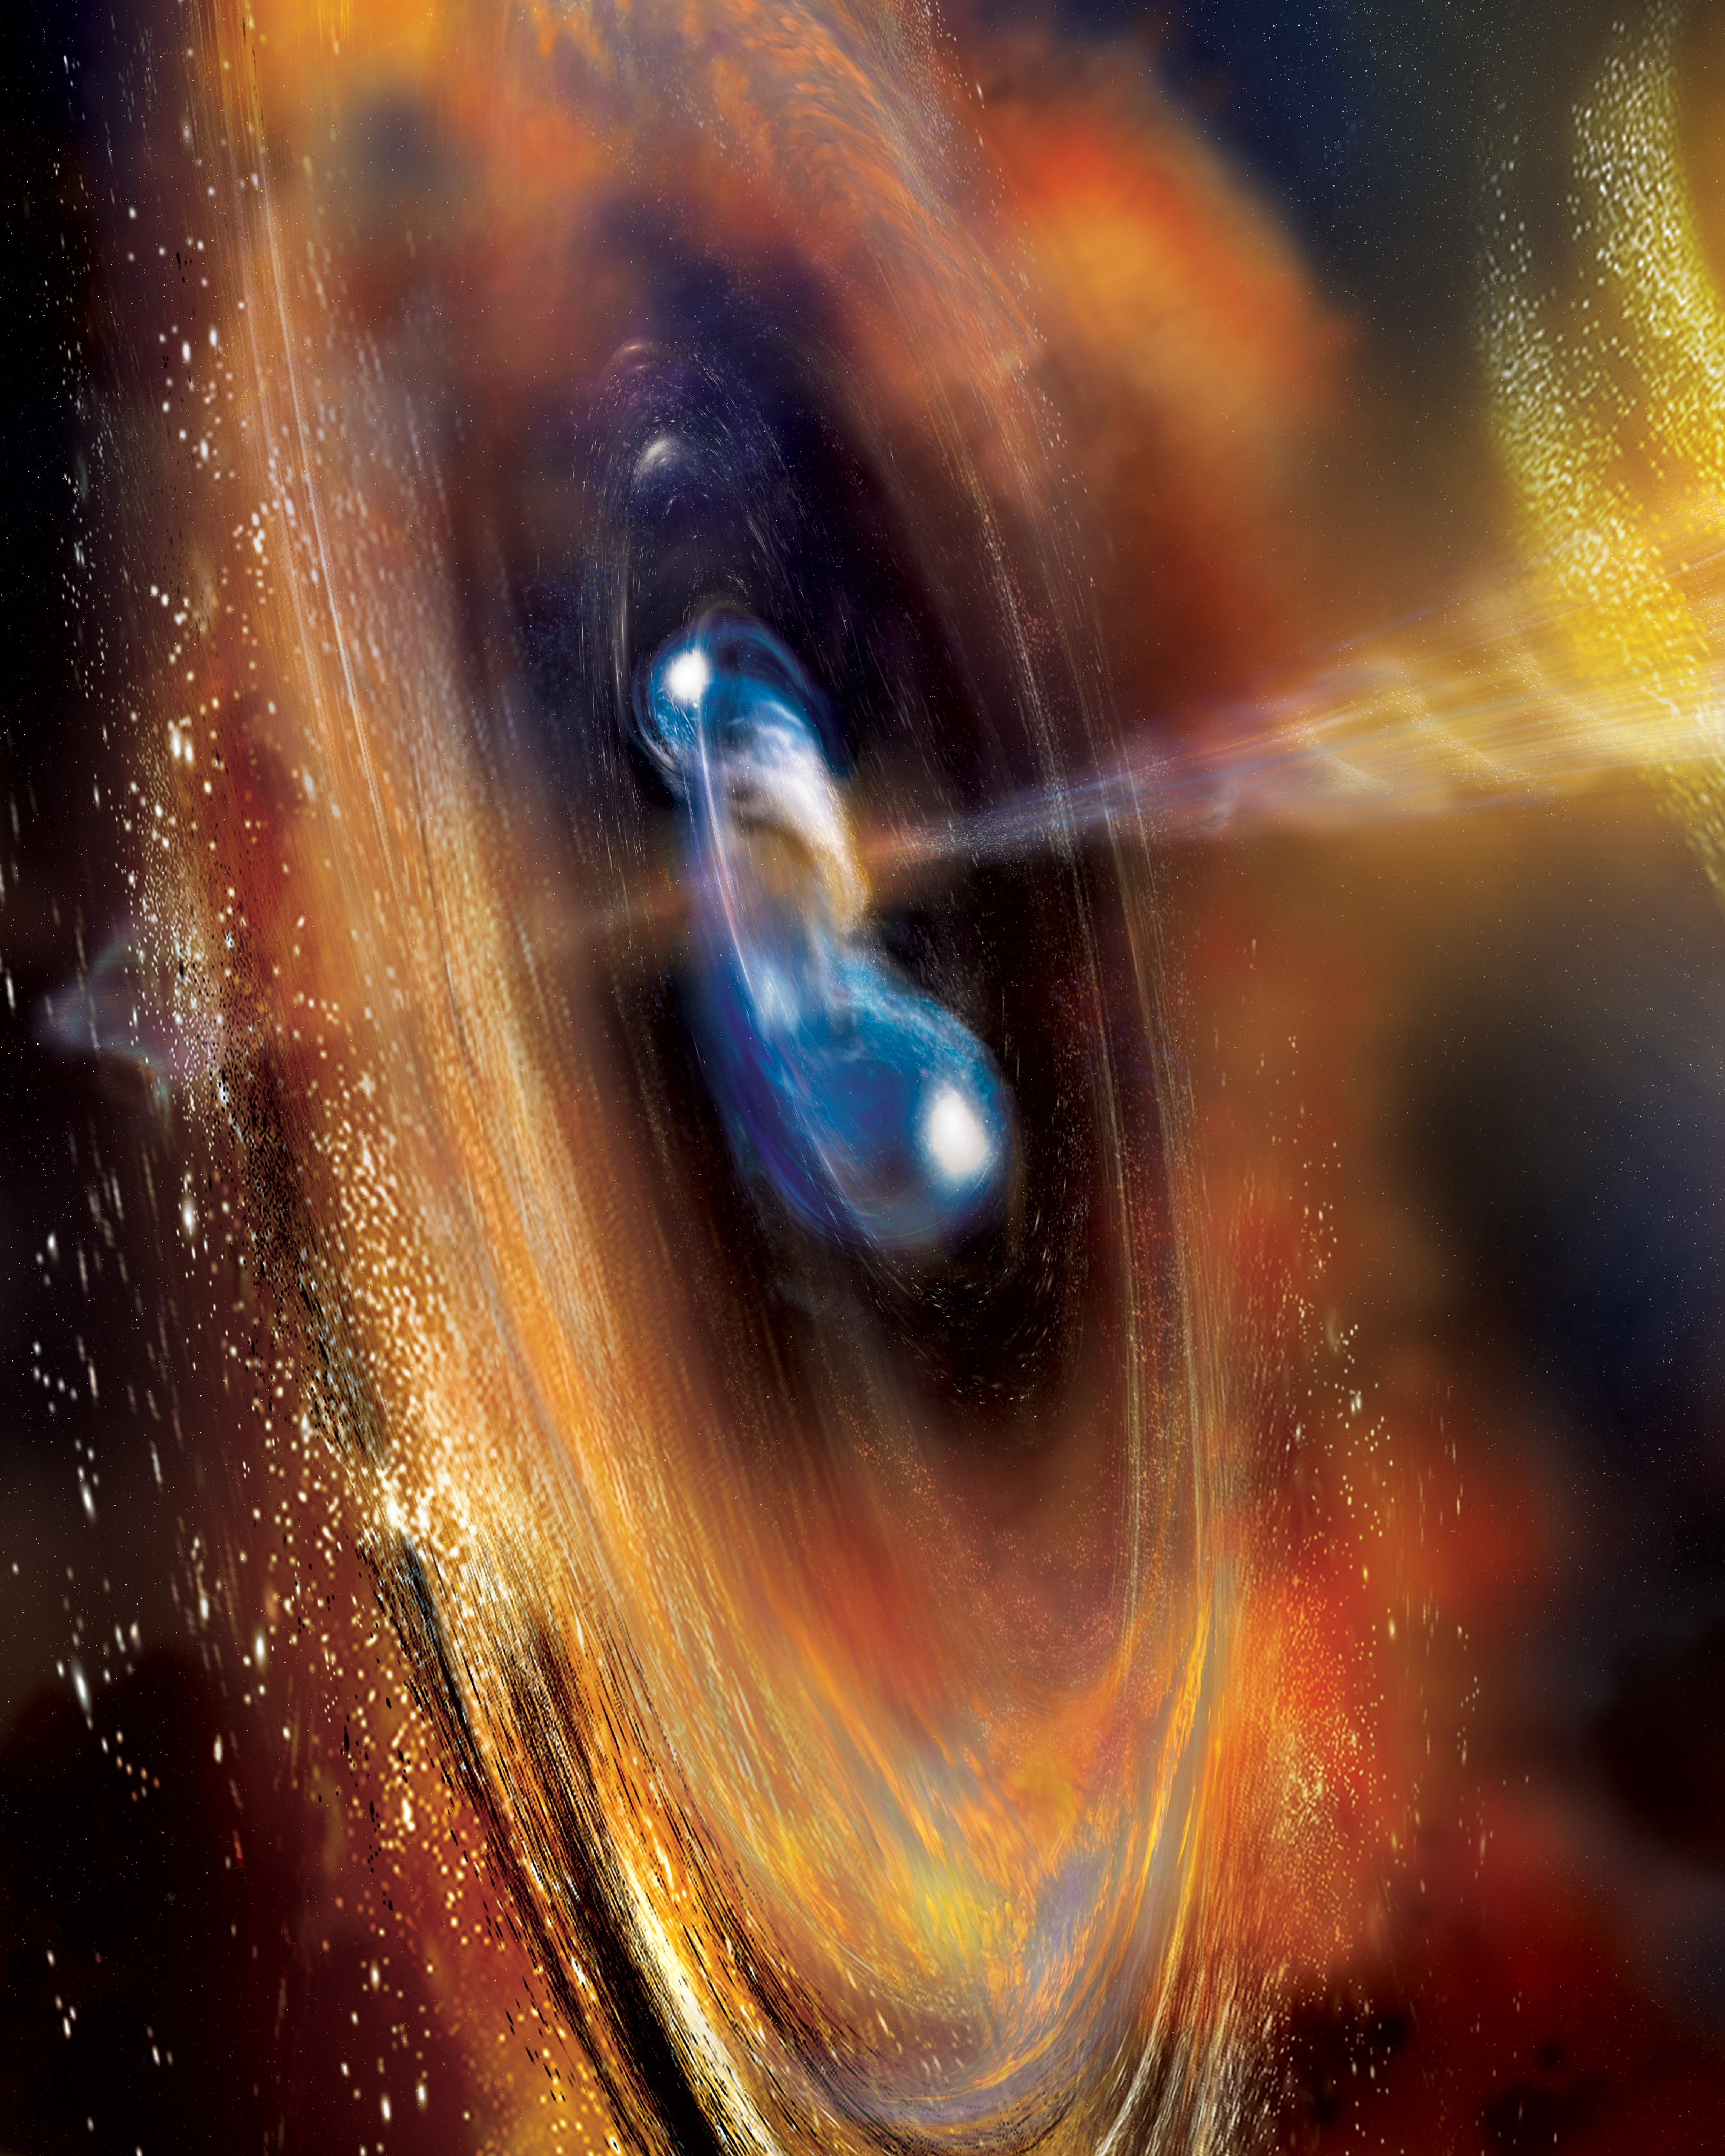 Two neutron stars begin to merge in this artist’s concept, blasting jets of high-speed particles. Collision events like this one create short gamma-ray bursts. Credit: NASA’s Goddard Space Flight Center/ A. Simonnet, Sonoma State University